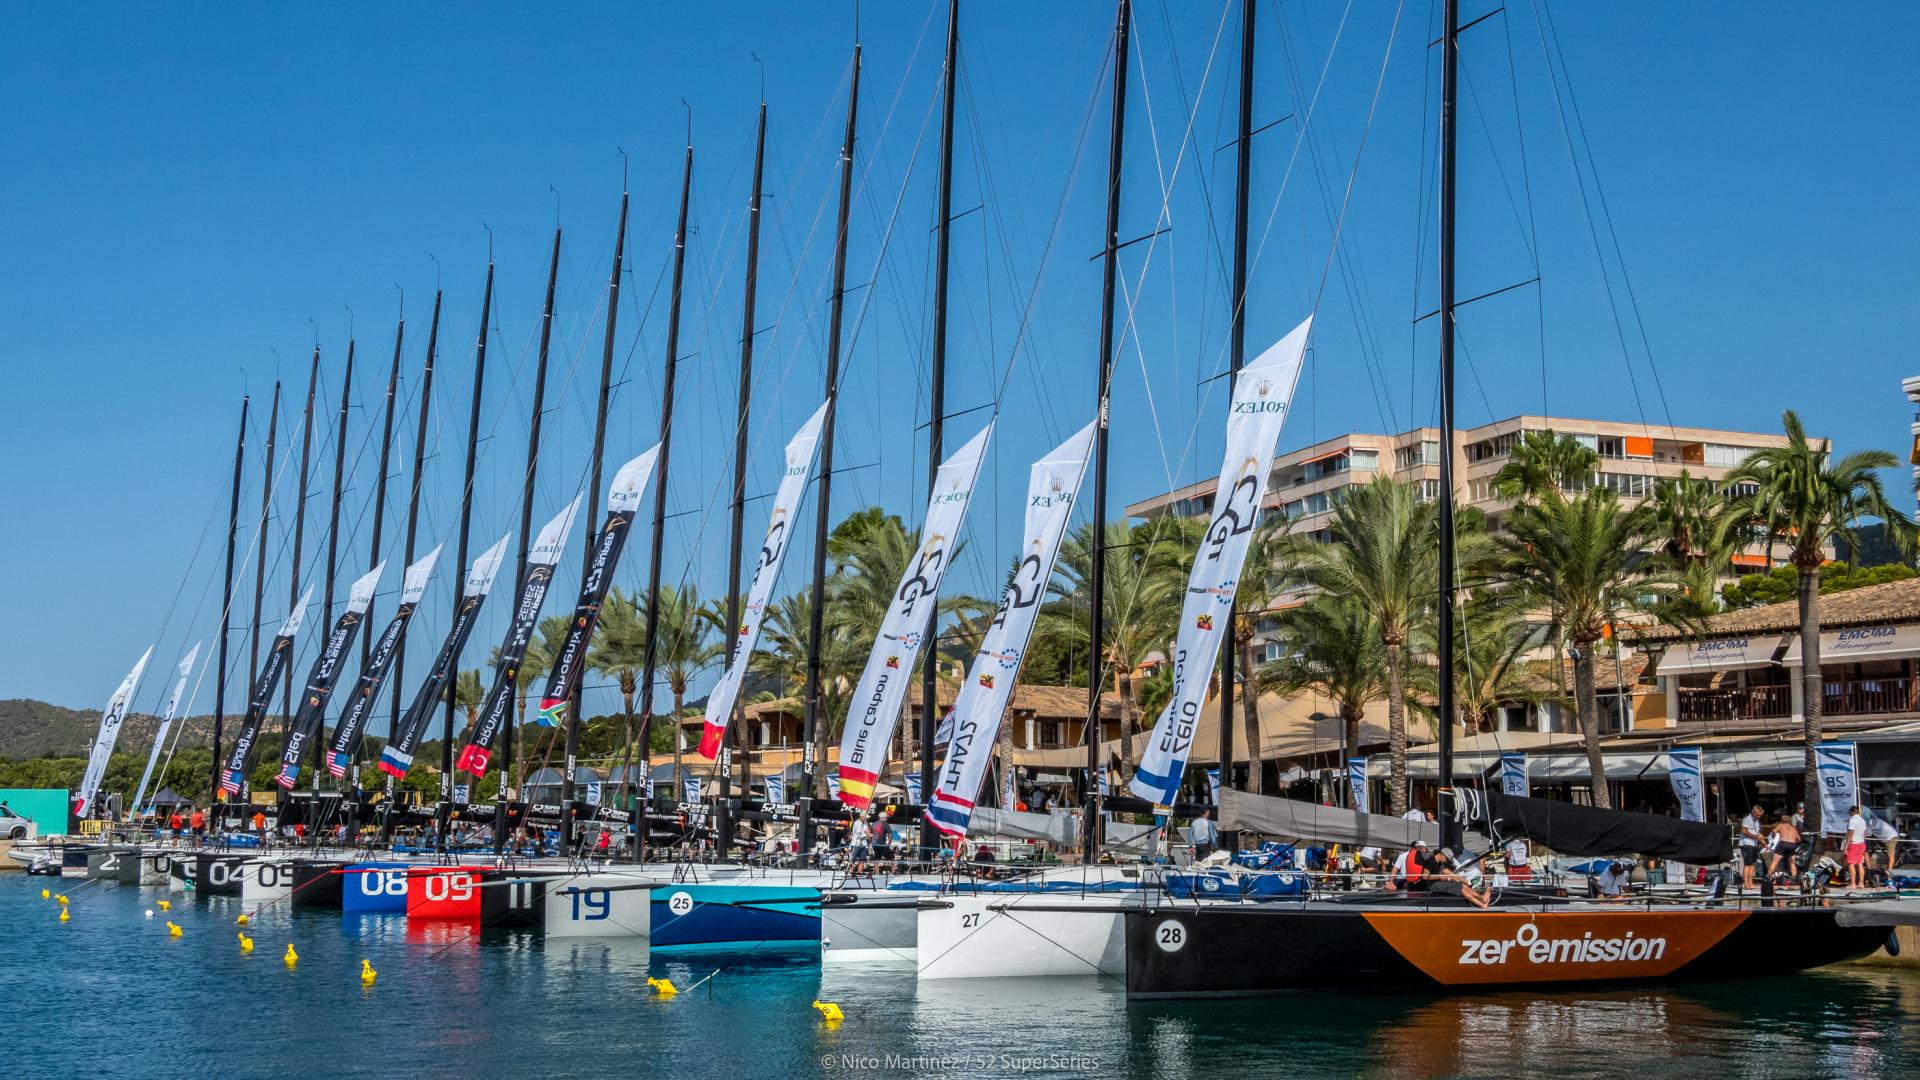 Happy days are here again, 52 Super Series fleet is ready to rumble